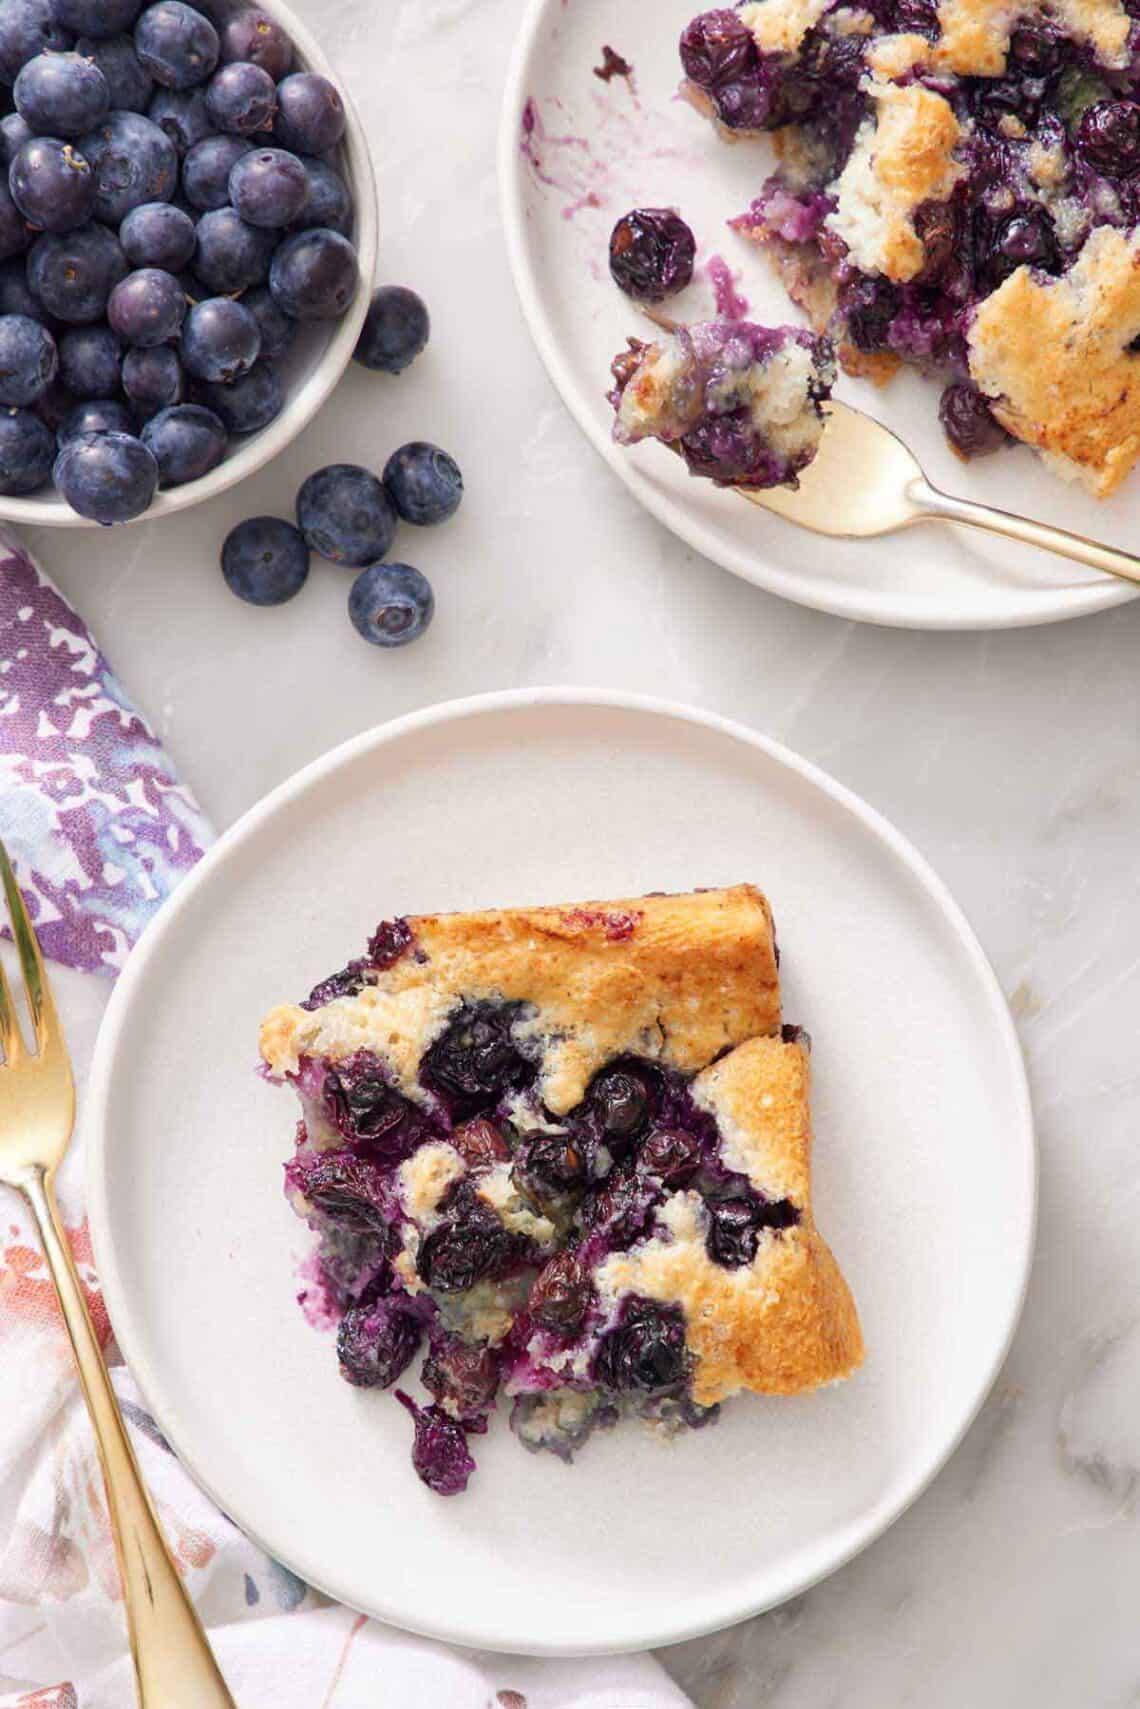 Overhead view of a slice of blueberry cobbler on a plate with another plate off to the side with a fork. A bowl of blueberries on the side.